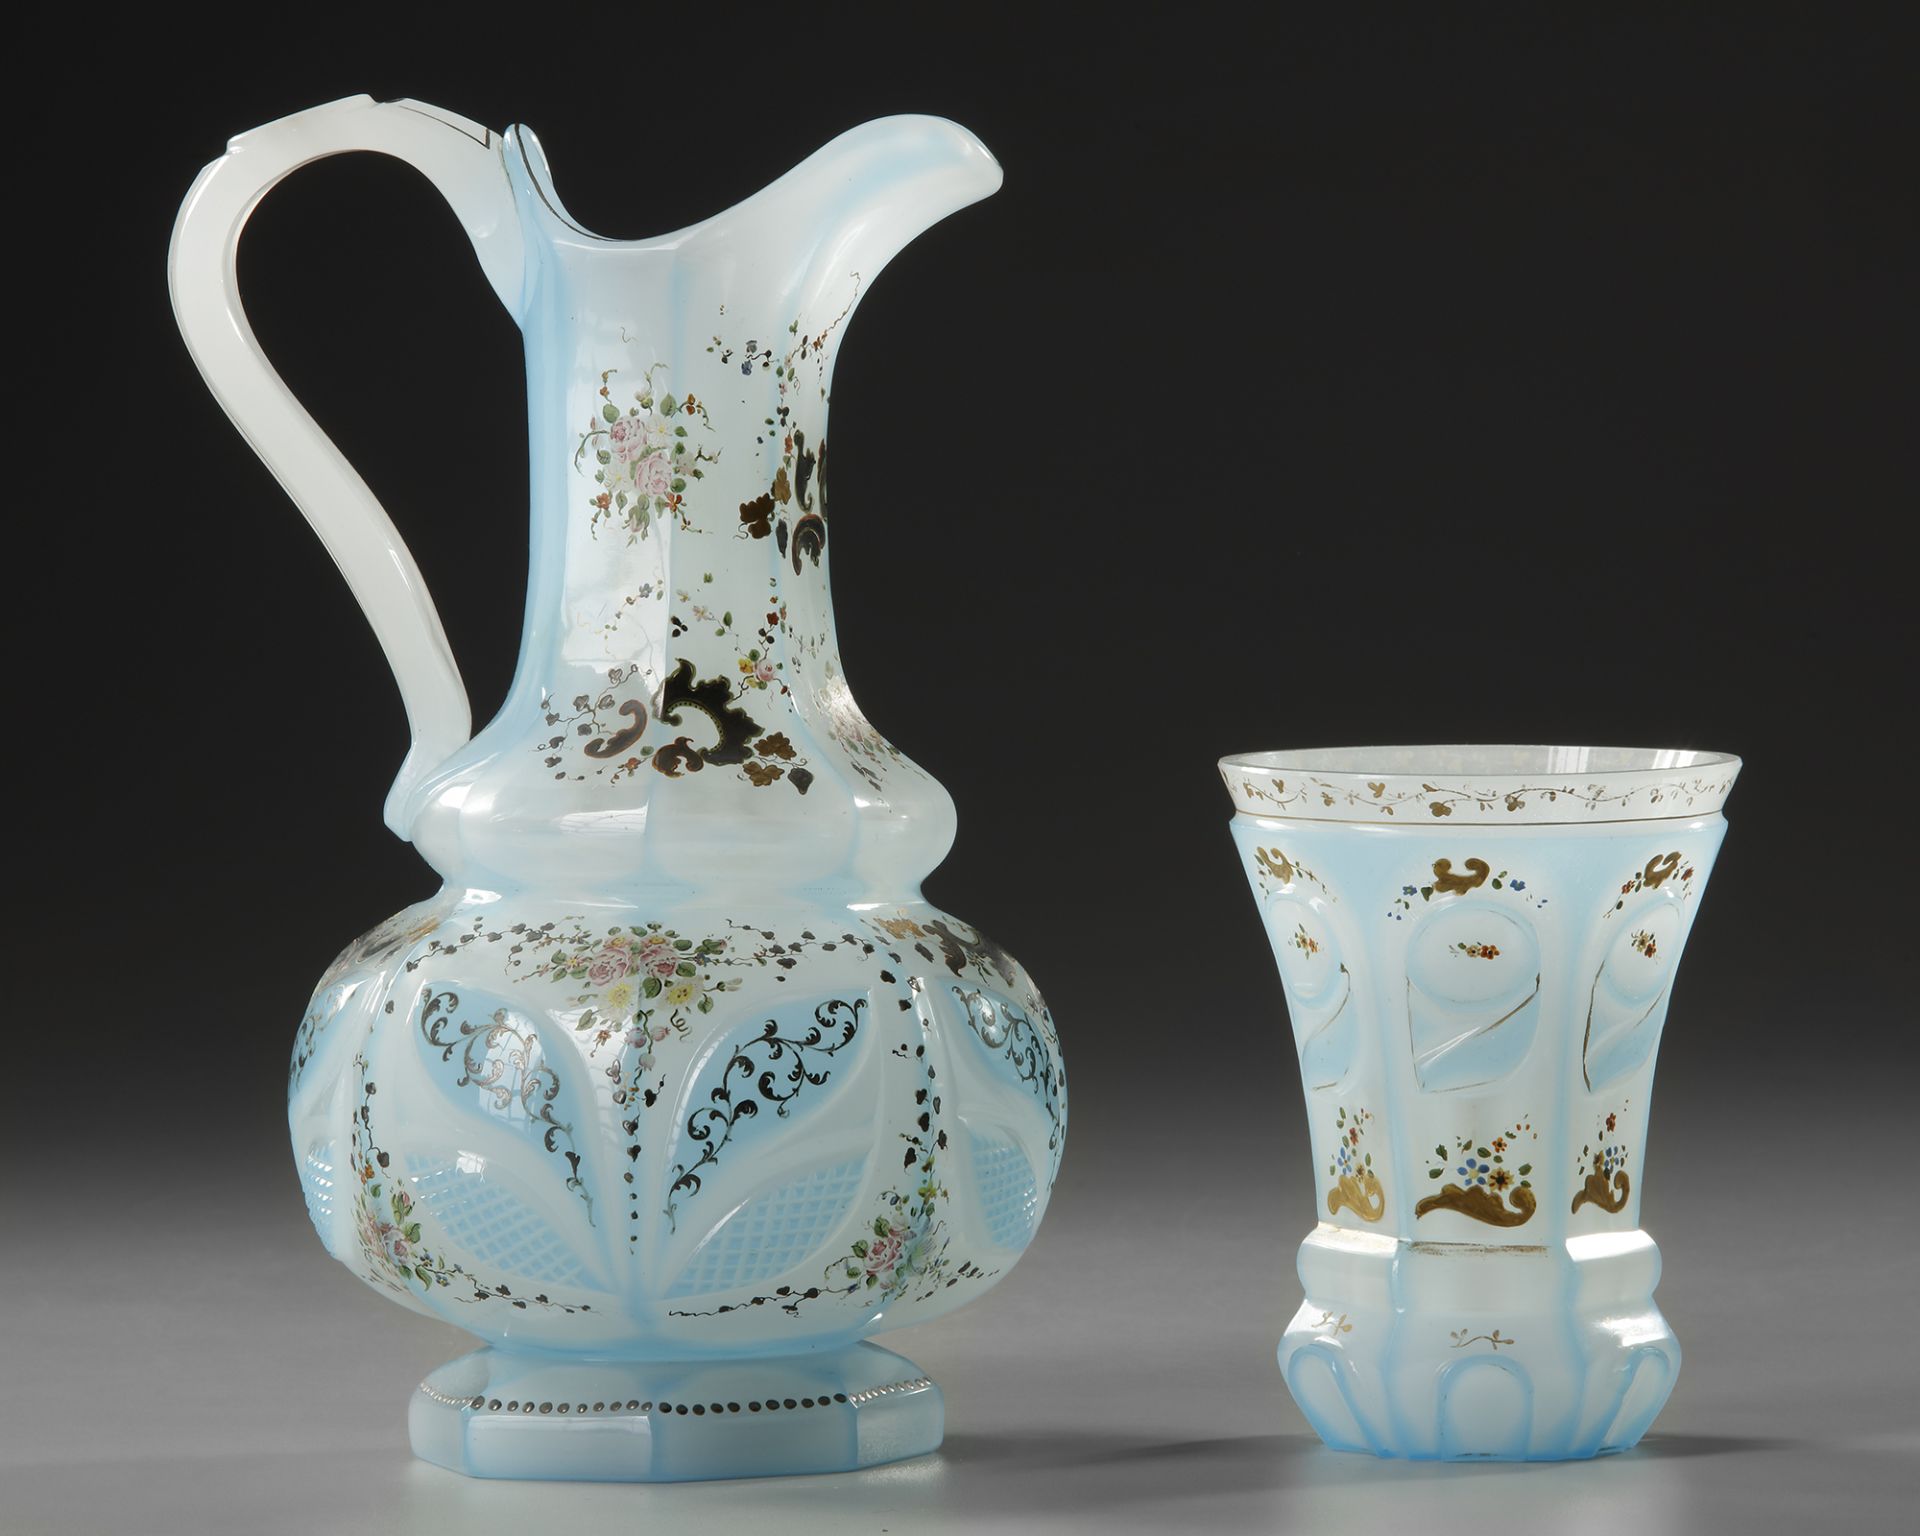 A SET IN CLEAR BLUE OPALINE GLASS, 19TH CENTURY